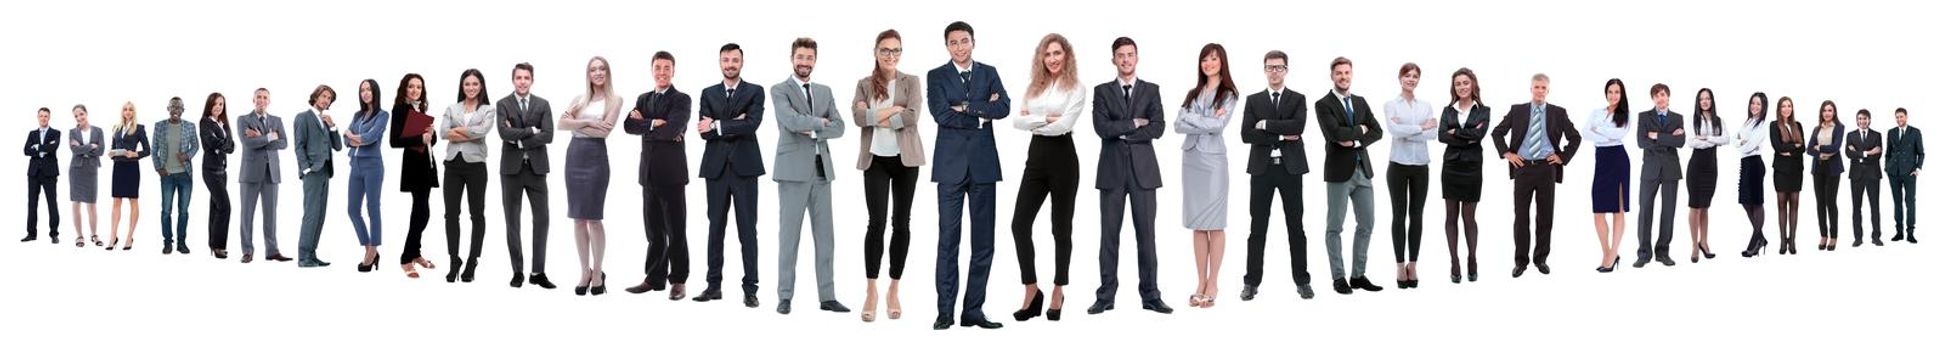 panoramic photo of a group of confident business people.isolated on white background.